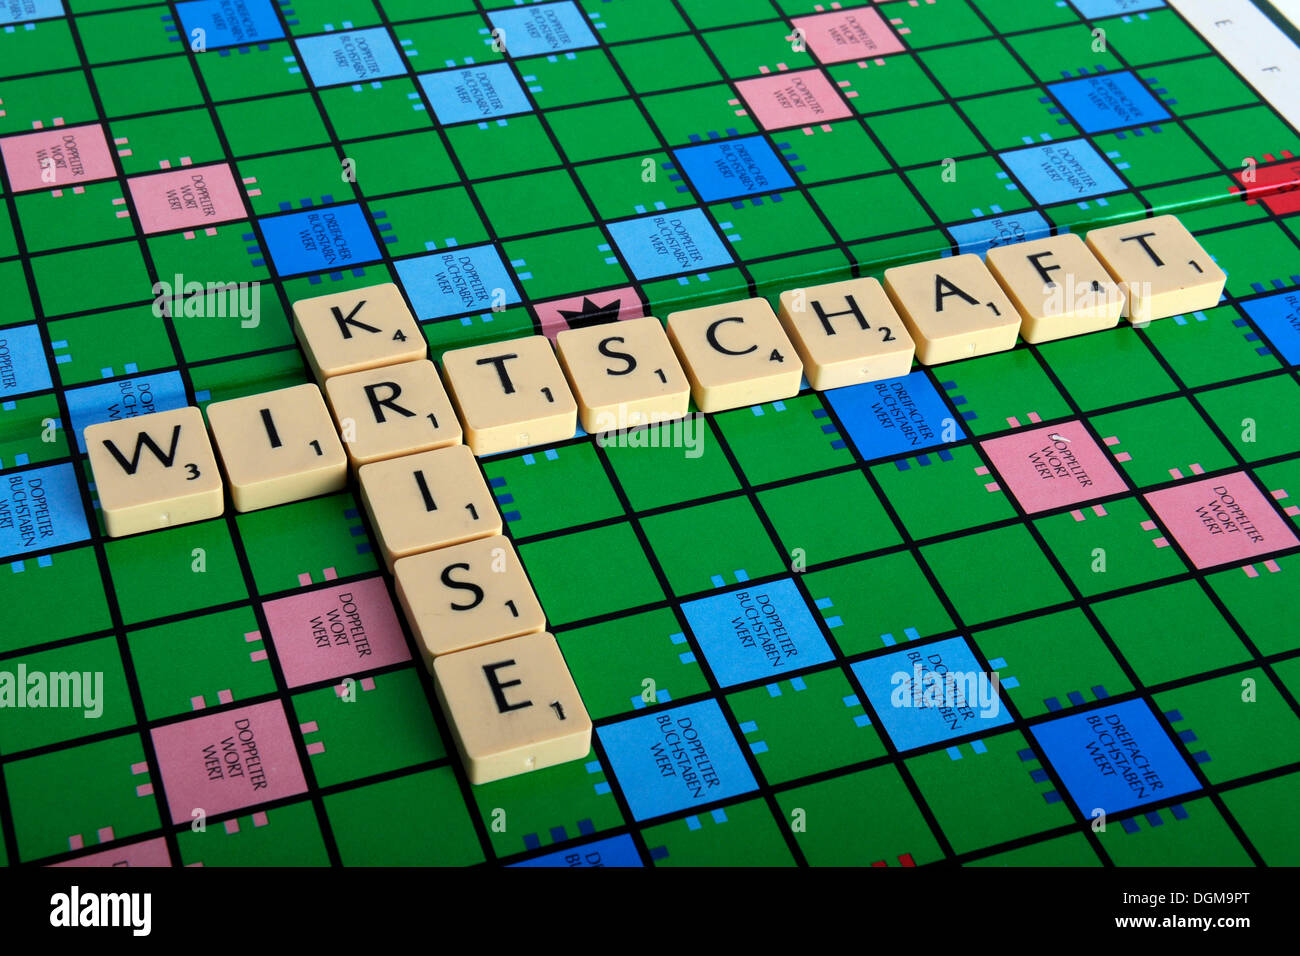 Scrabble letters forming the words Wirtschaft and Krise, German for economic crisis Stock Photo